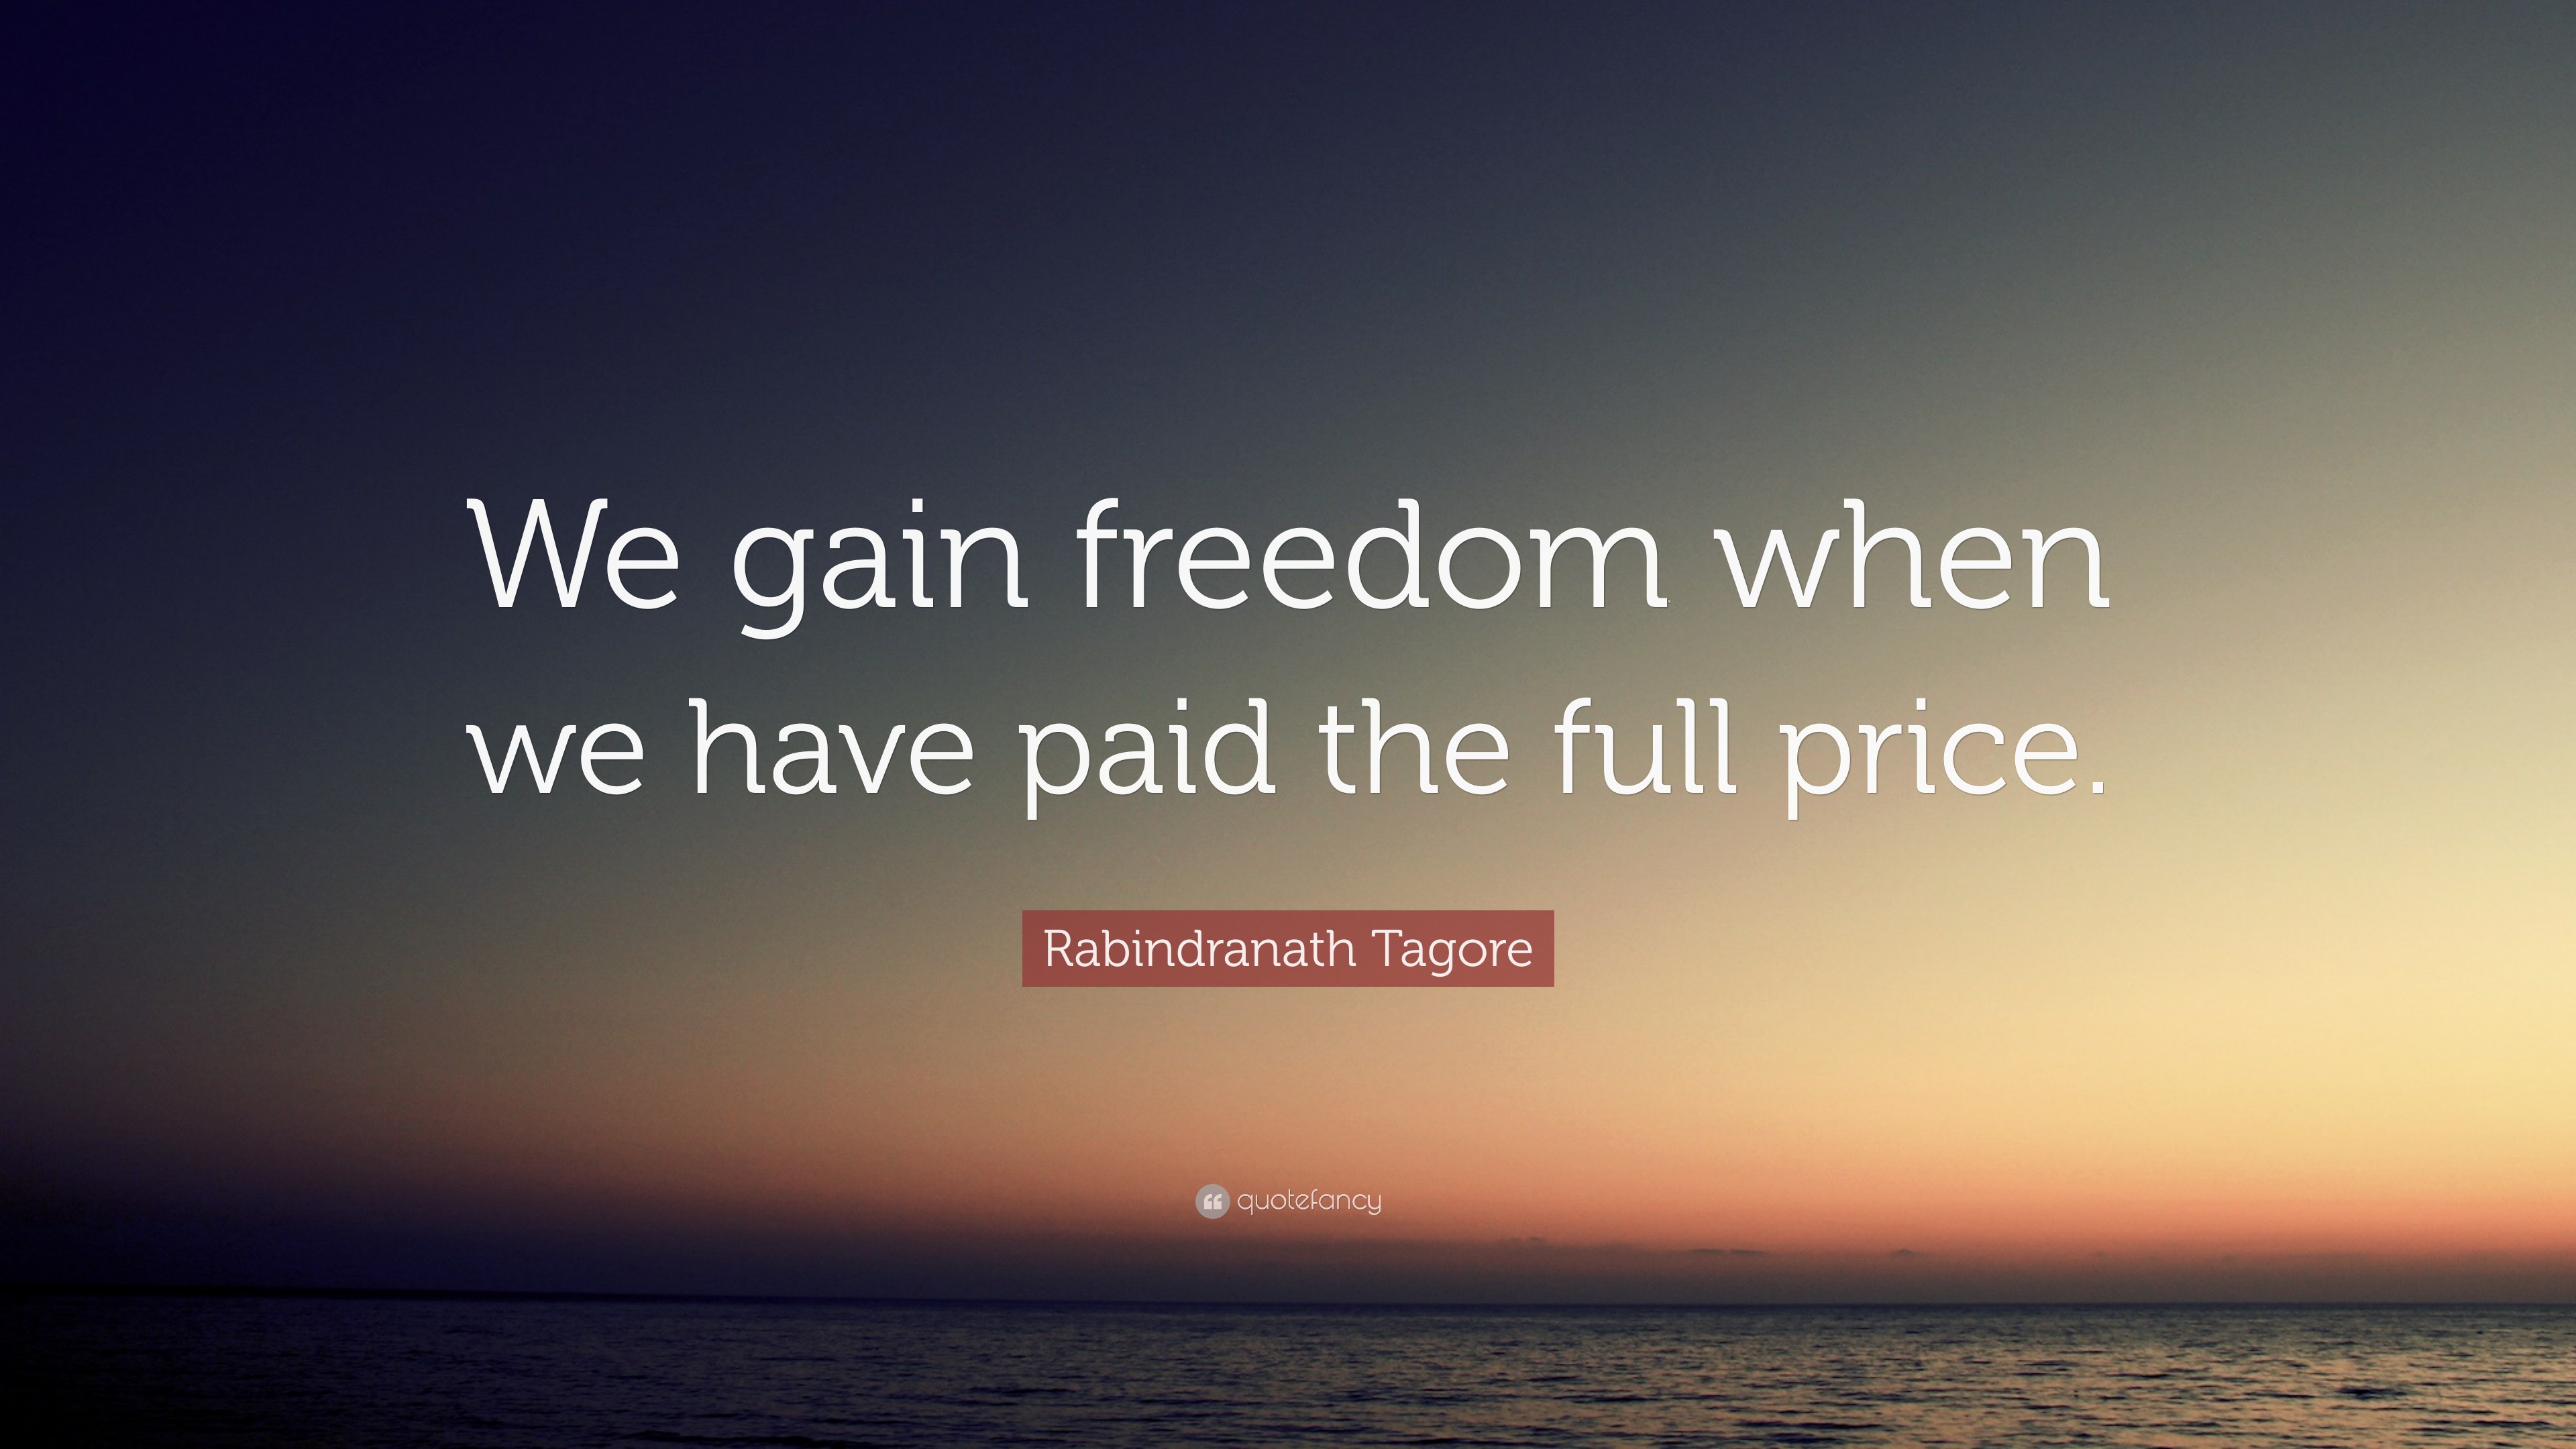 Rabindranath Tagore - We gain freedom when we have paid